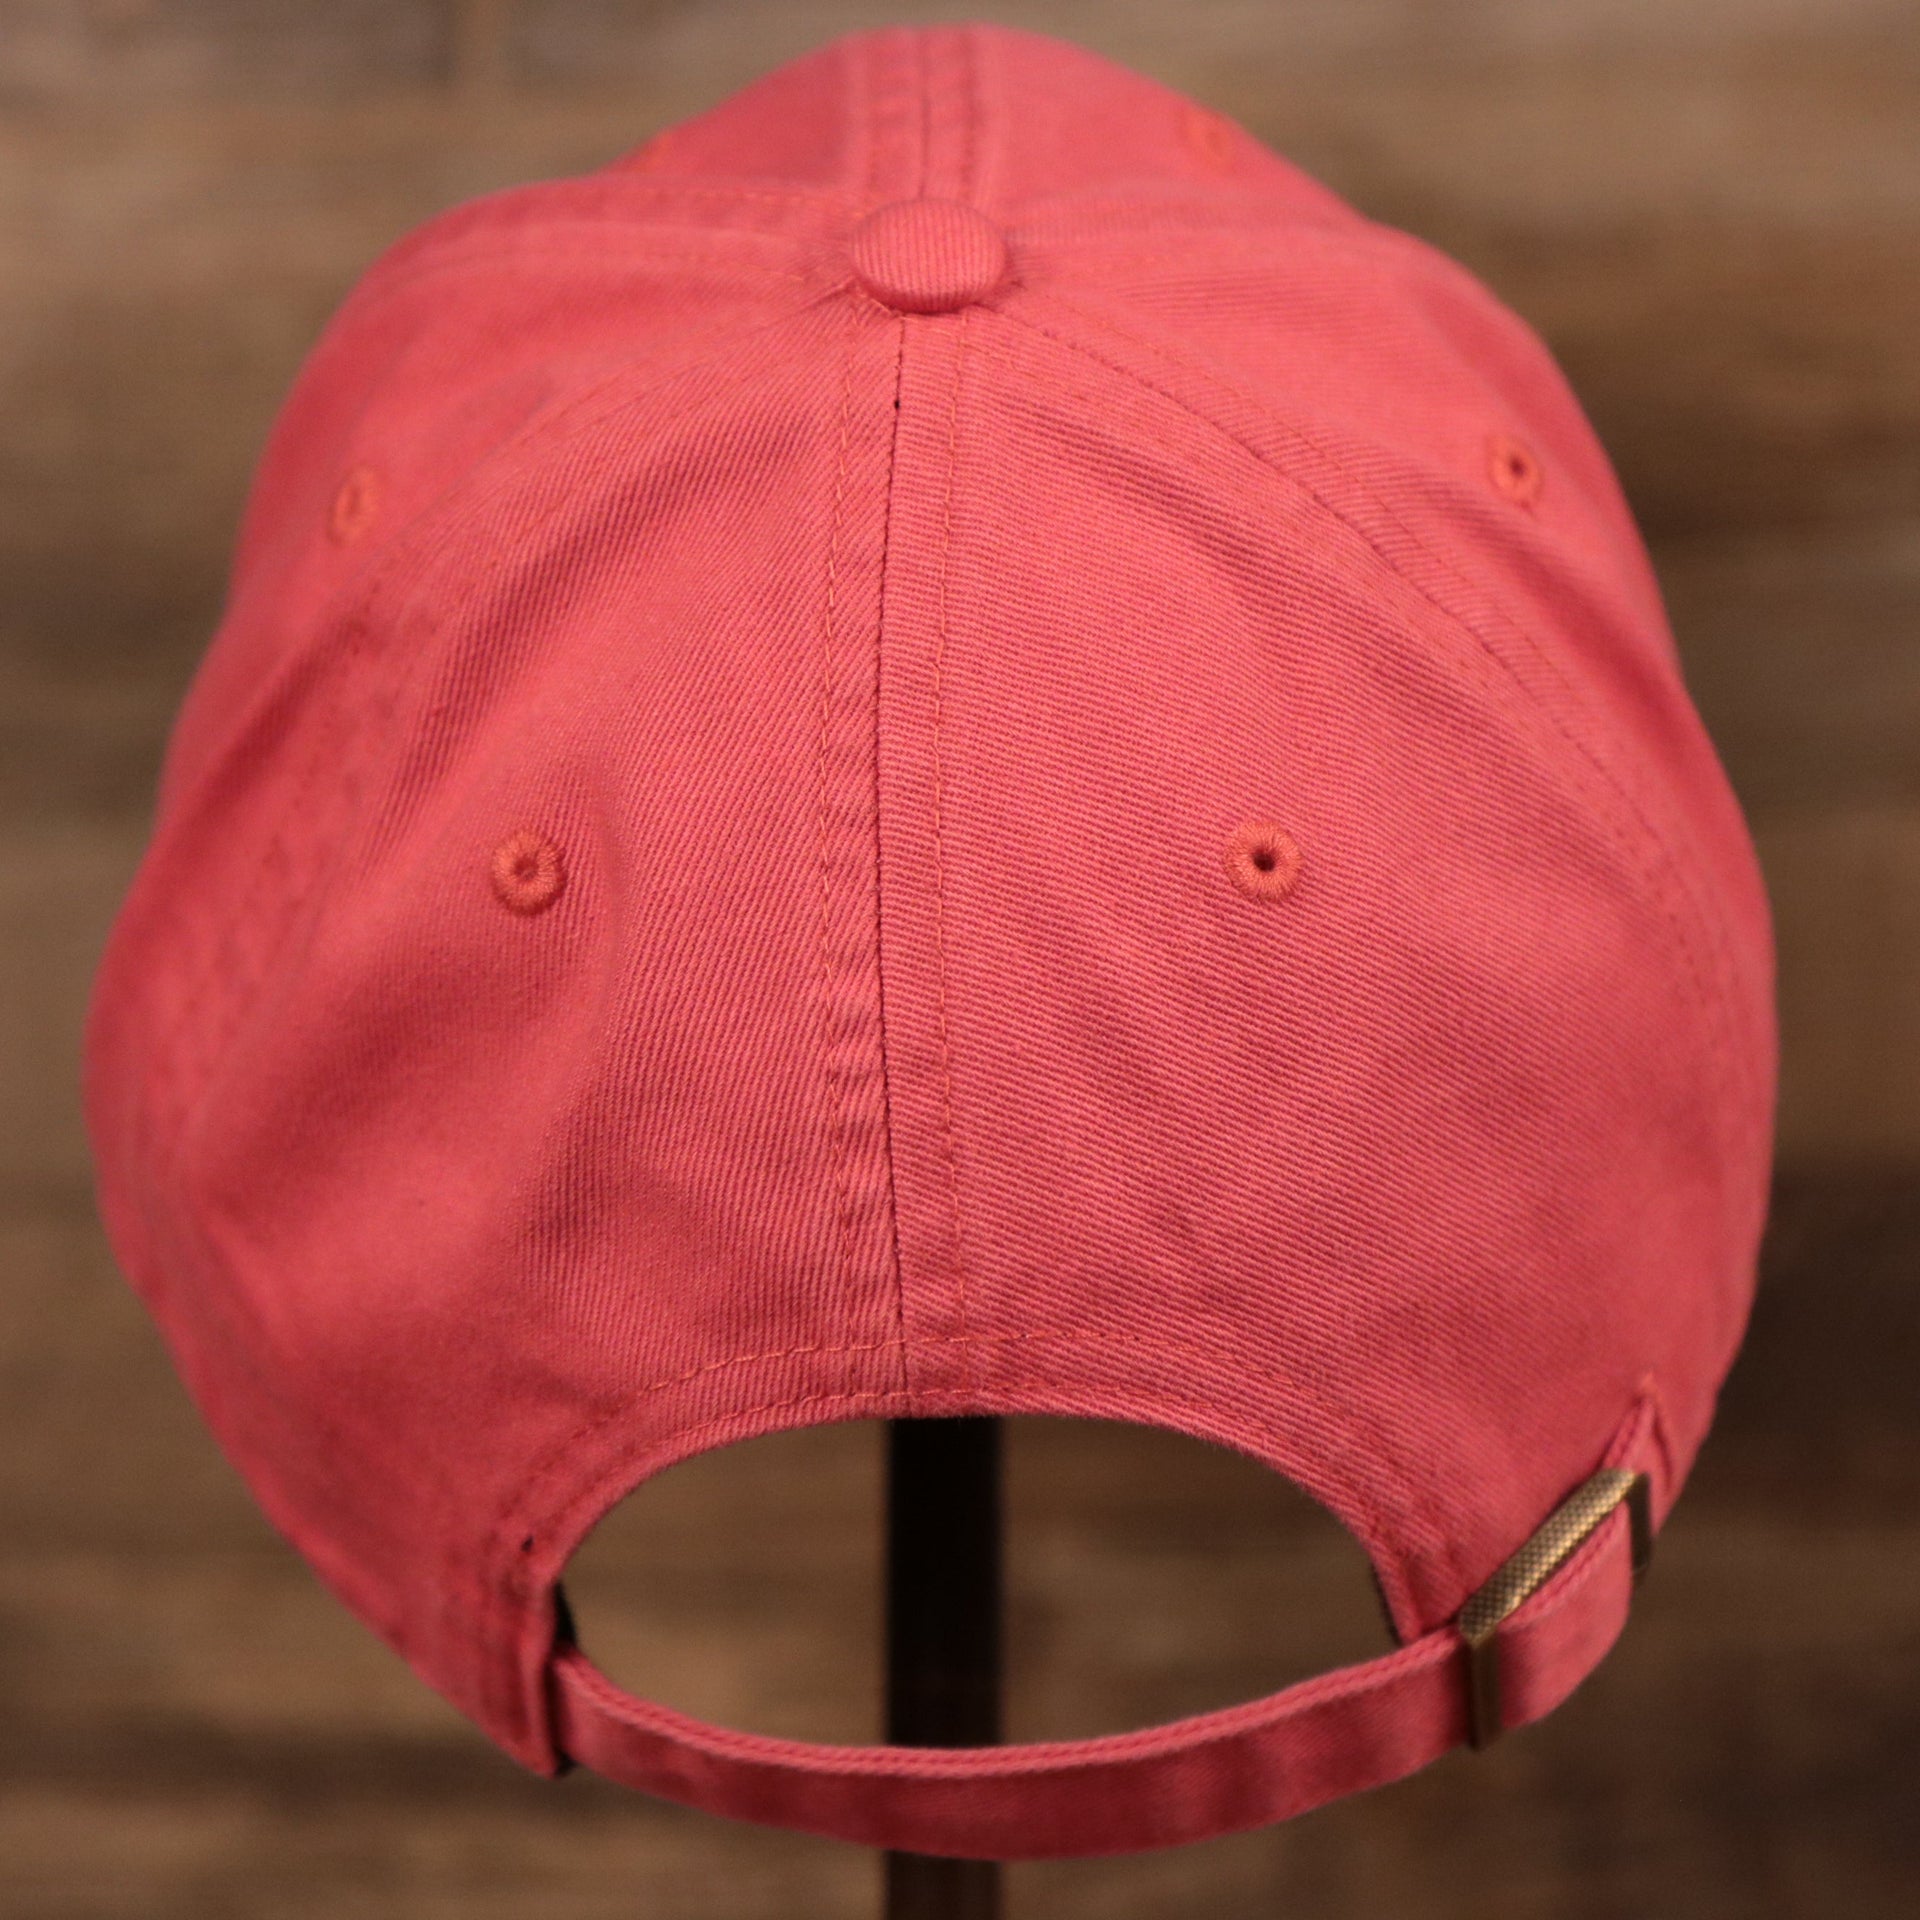 The adjustable strap of the pink cotton green bottom clean up cap of the Los Angeles Dodgers.